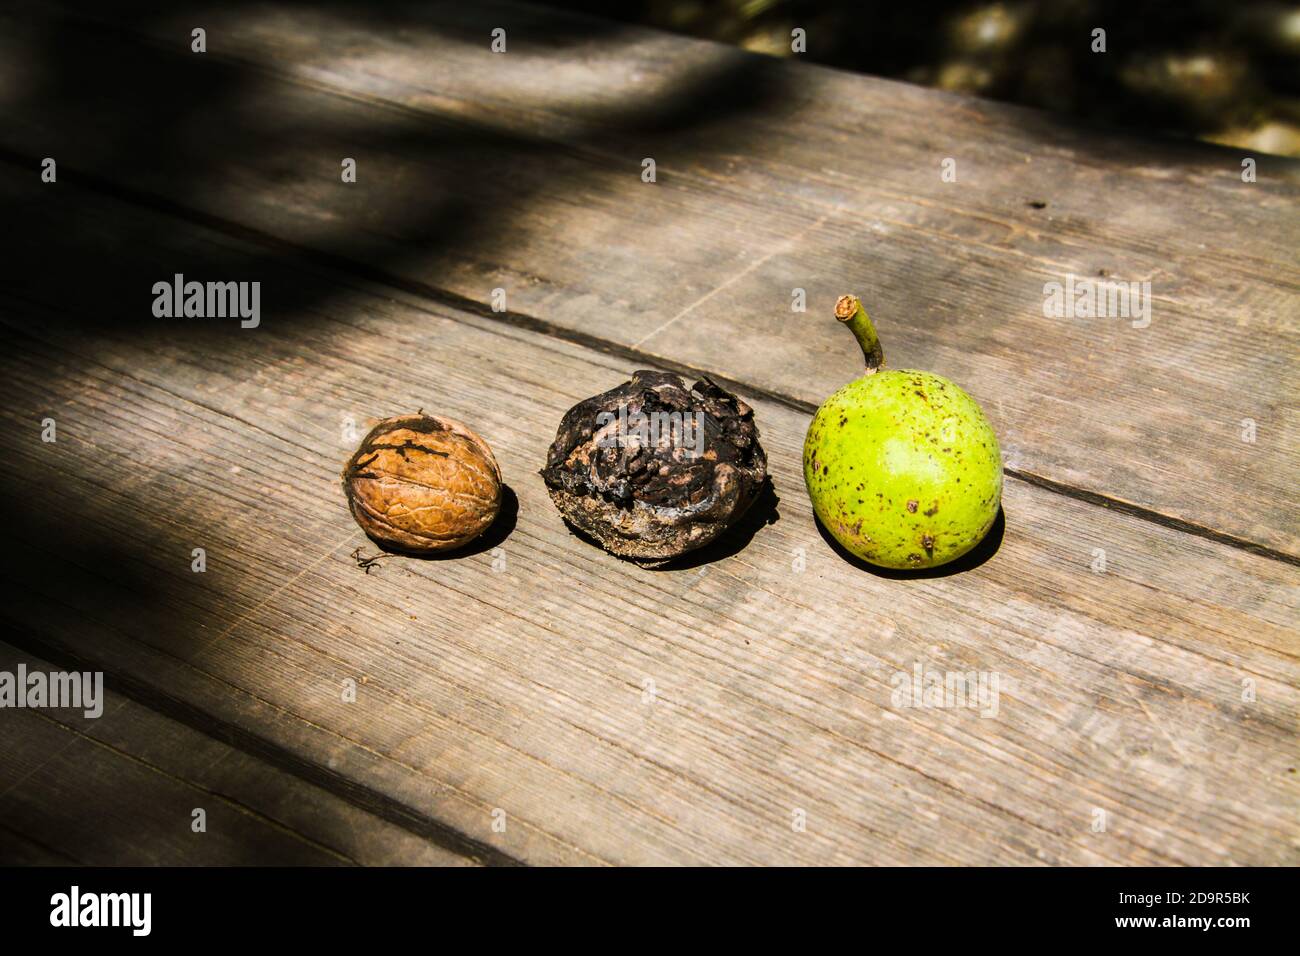 Three walnuts in different maturity states lie on a wooden table: green, medium-ripe and ripe. Stock Photo